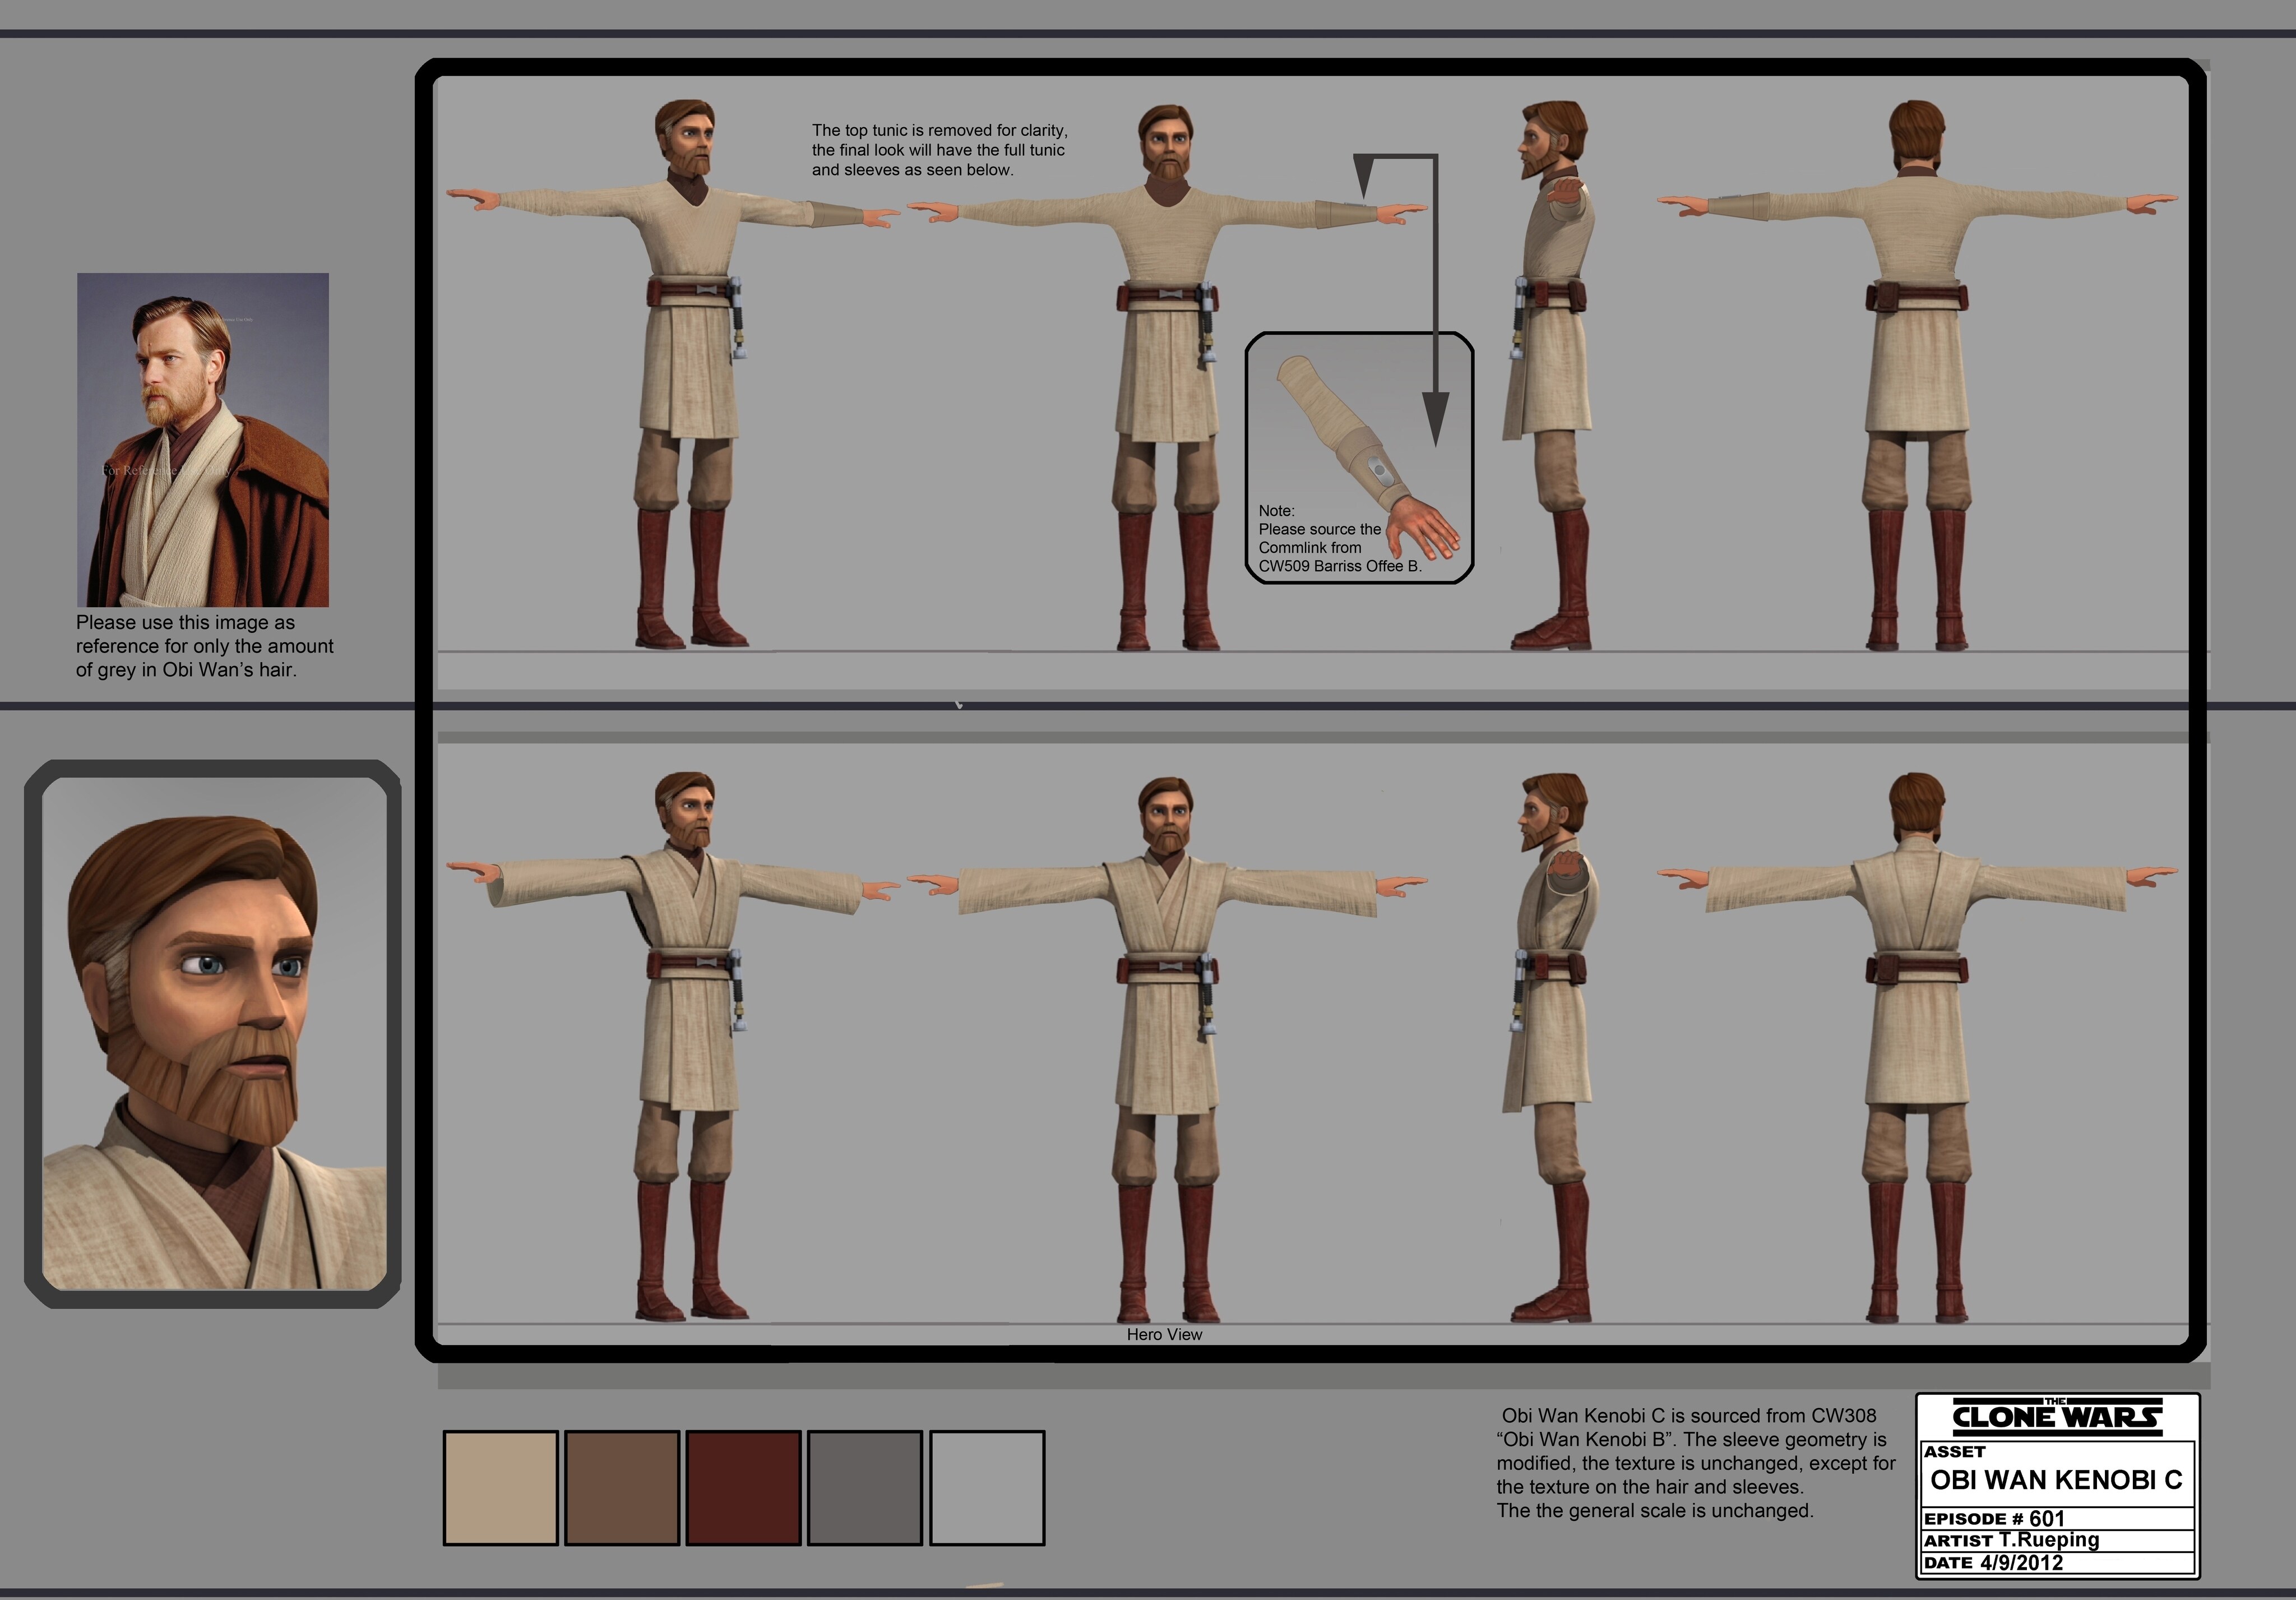 The models used for Anakin and Obi-Wan in the final season of Star Wars: The Clone Wars have been...